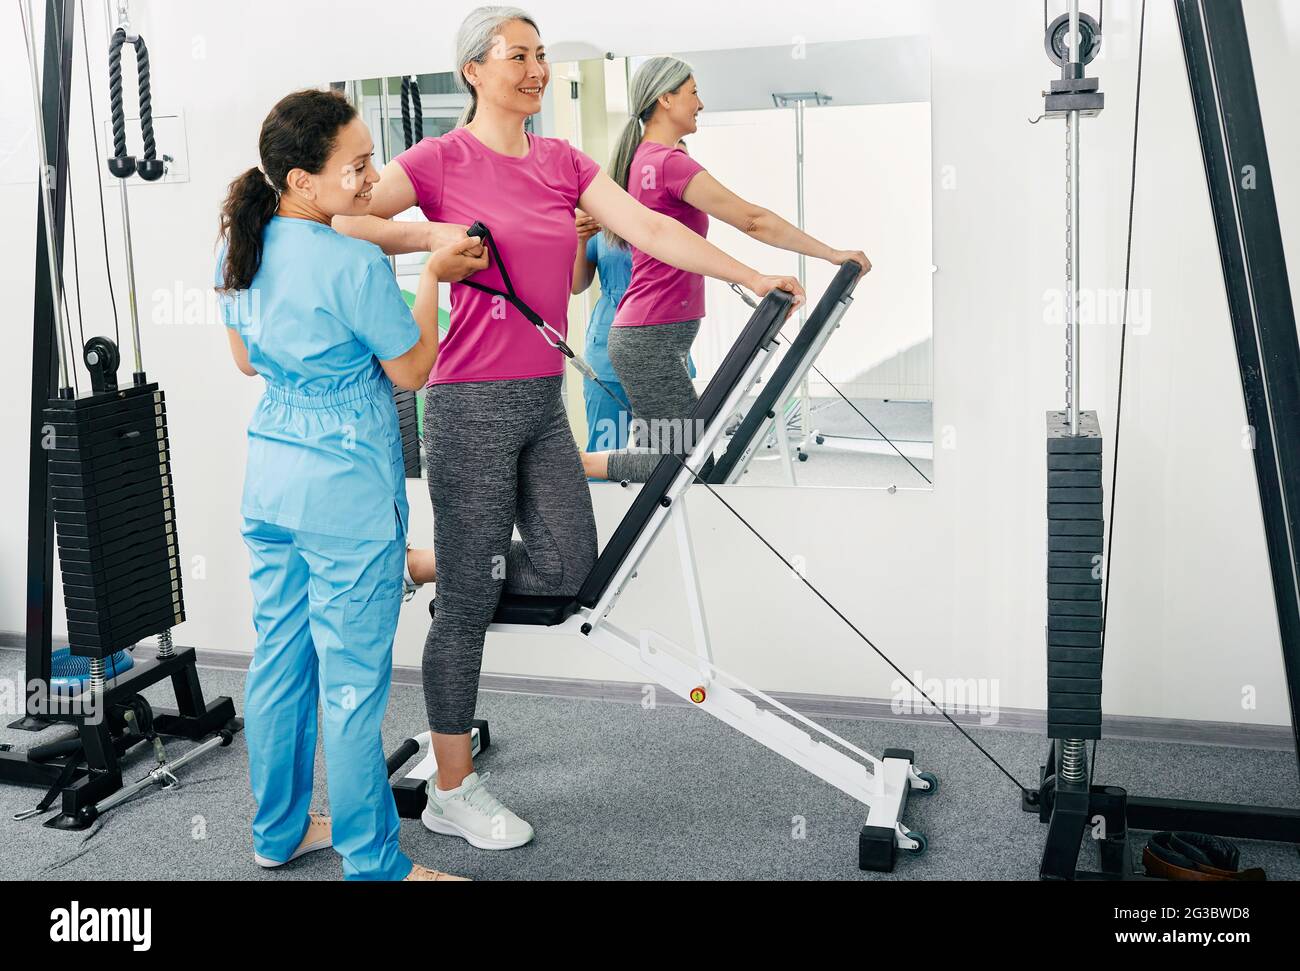 Mature woman patient at physiotherapy doing rehab exercises with her chiropractor using exercise machine Stock Photo